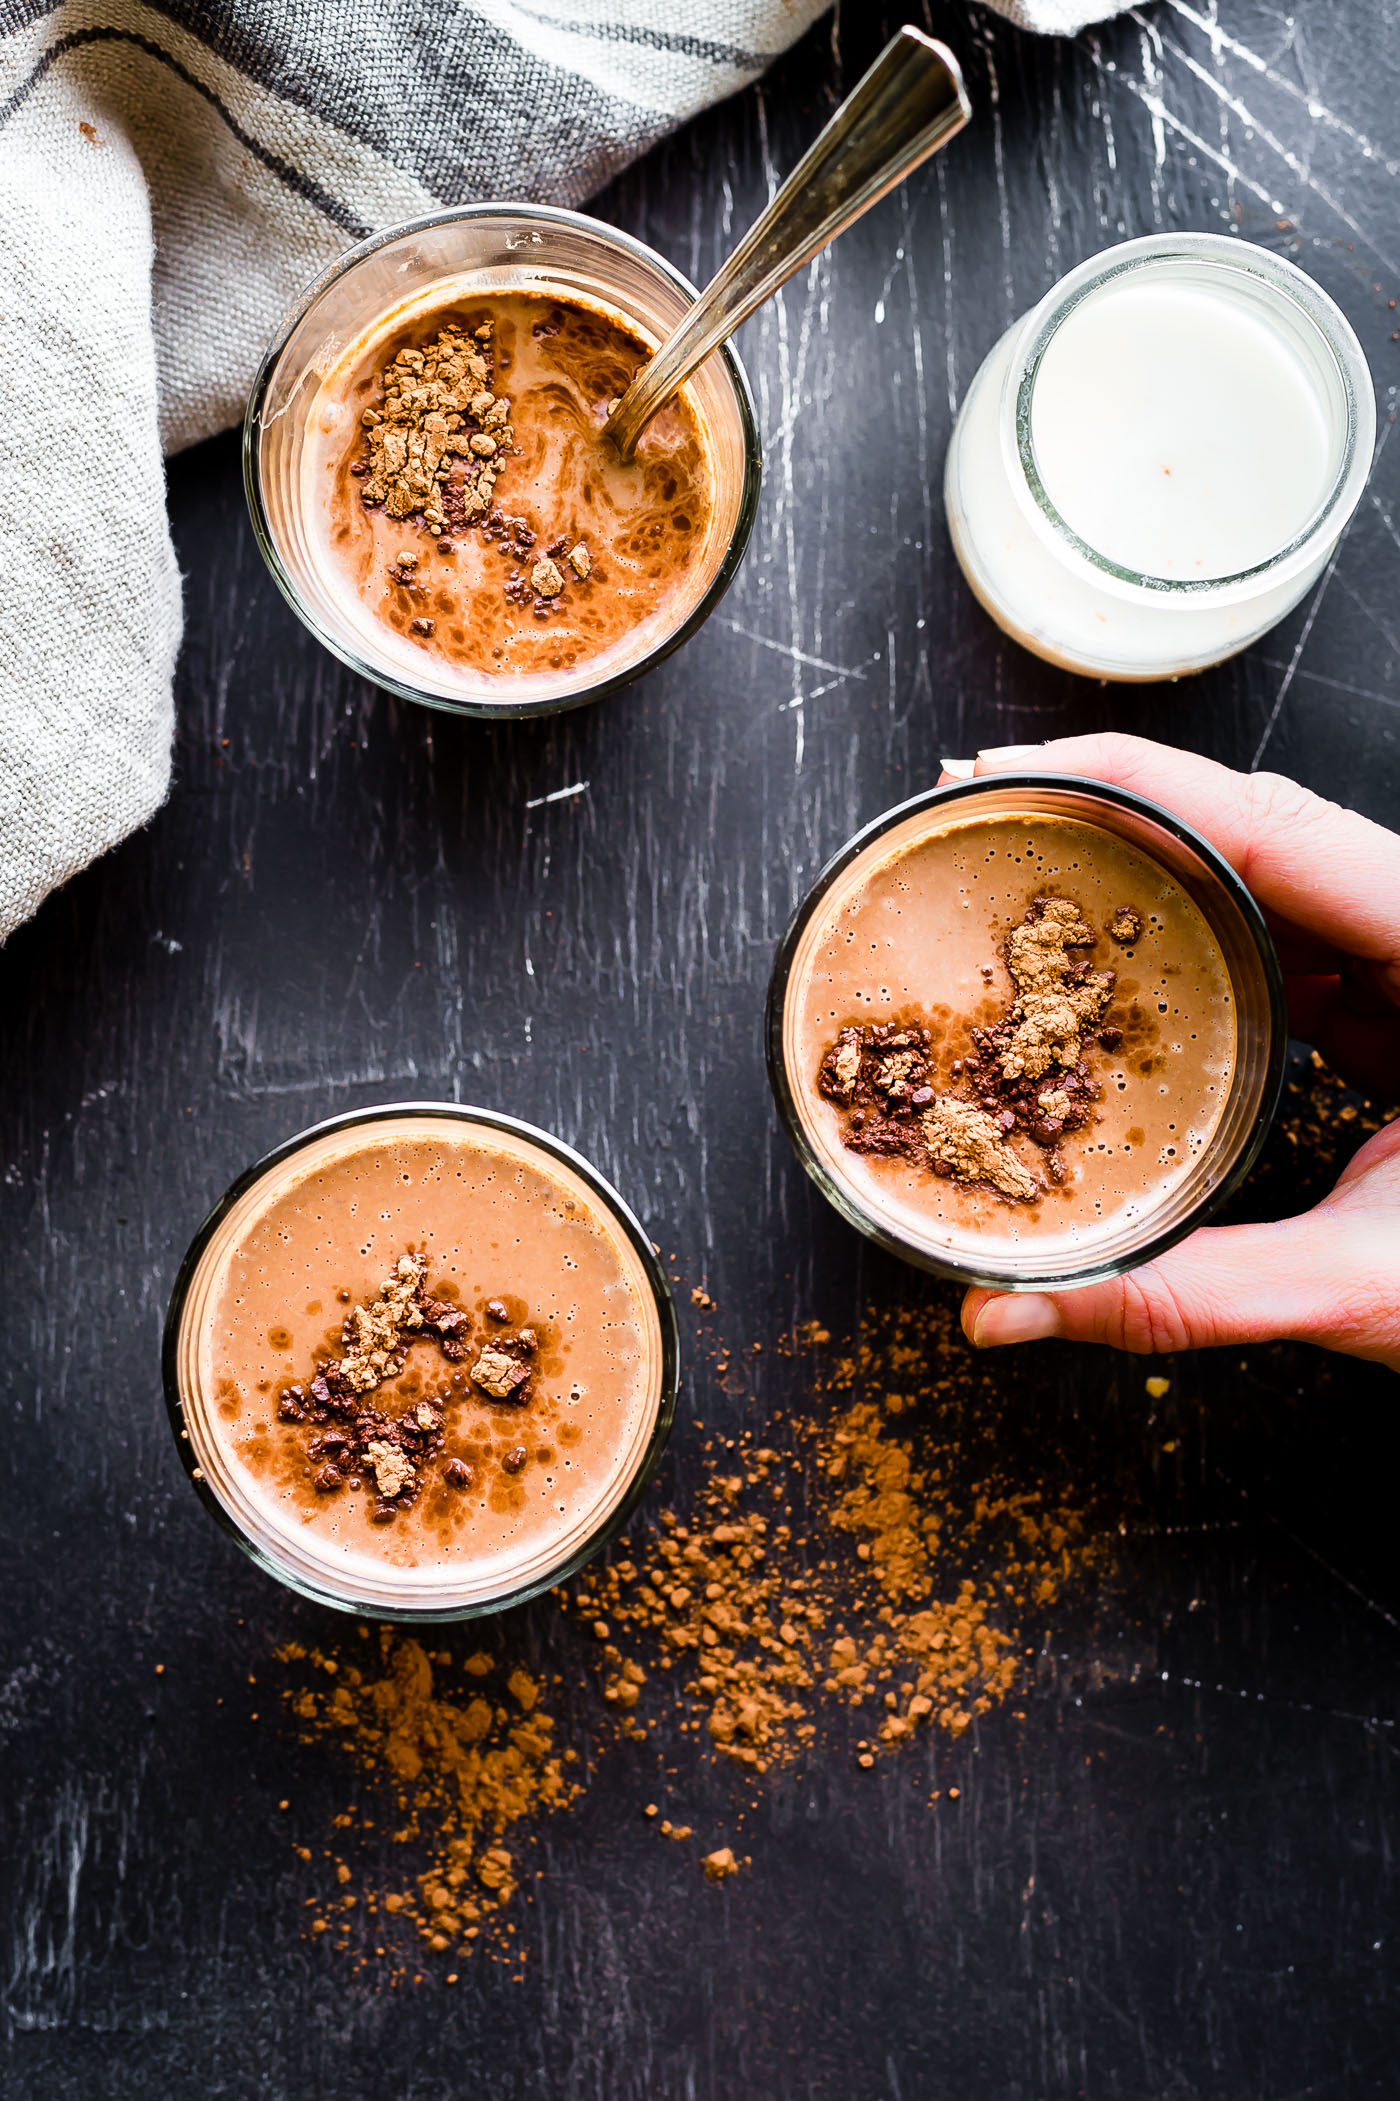 This low carb shake recipe, full of healthy coconut cream and unsweetened chocolate cocoa, will fuel your body for the day! The health benefits of this delicious vegan friendly, paleo shake recipe will keep you energized and nourished.